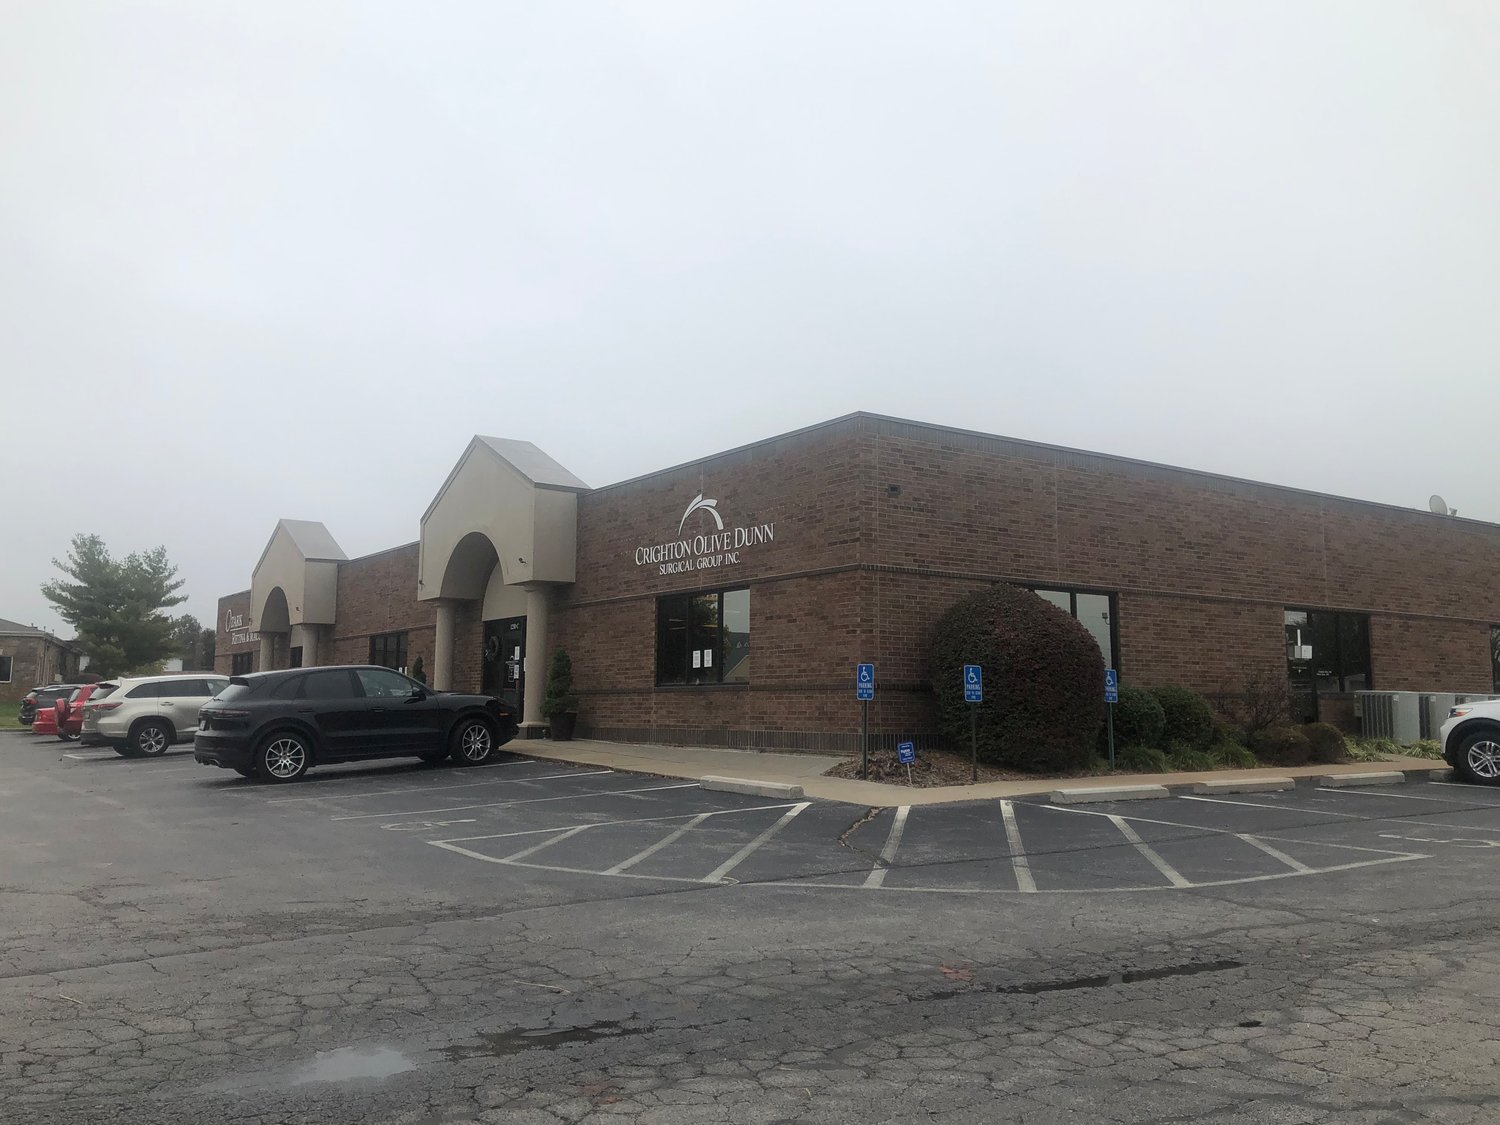 The CoxHealth Vein Center is slated to take the place of Crighton Olive Dunn Surgical Group at 1230 E. Kingsley St., Ste. C.